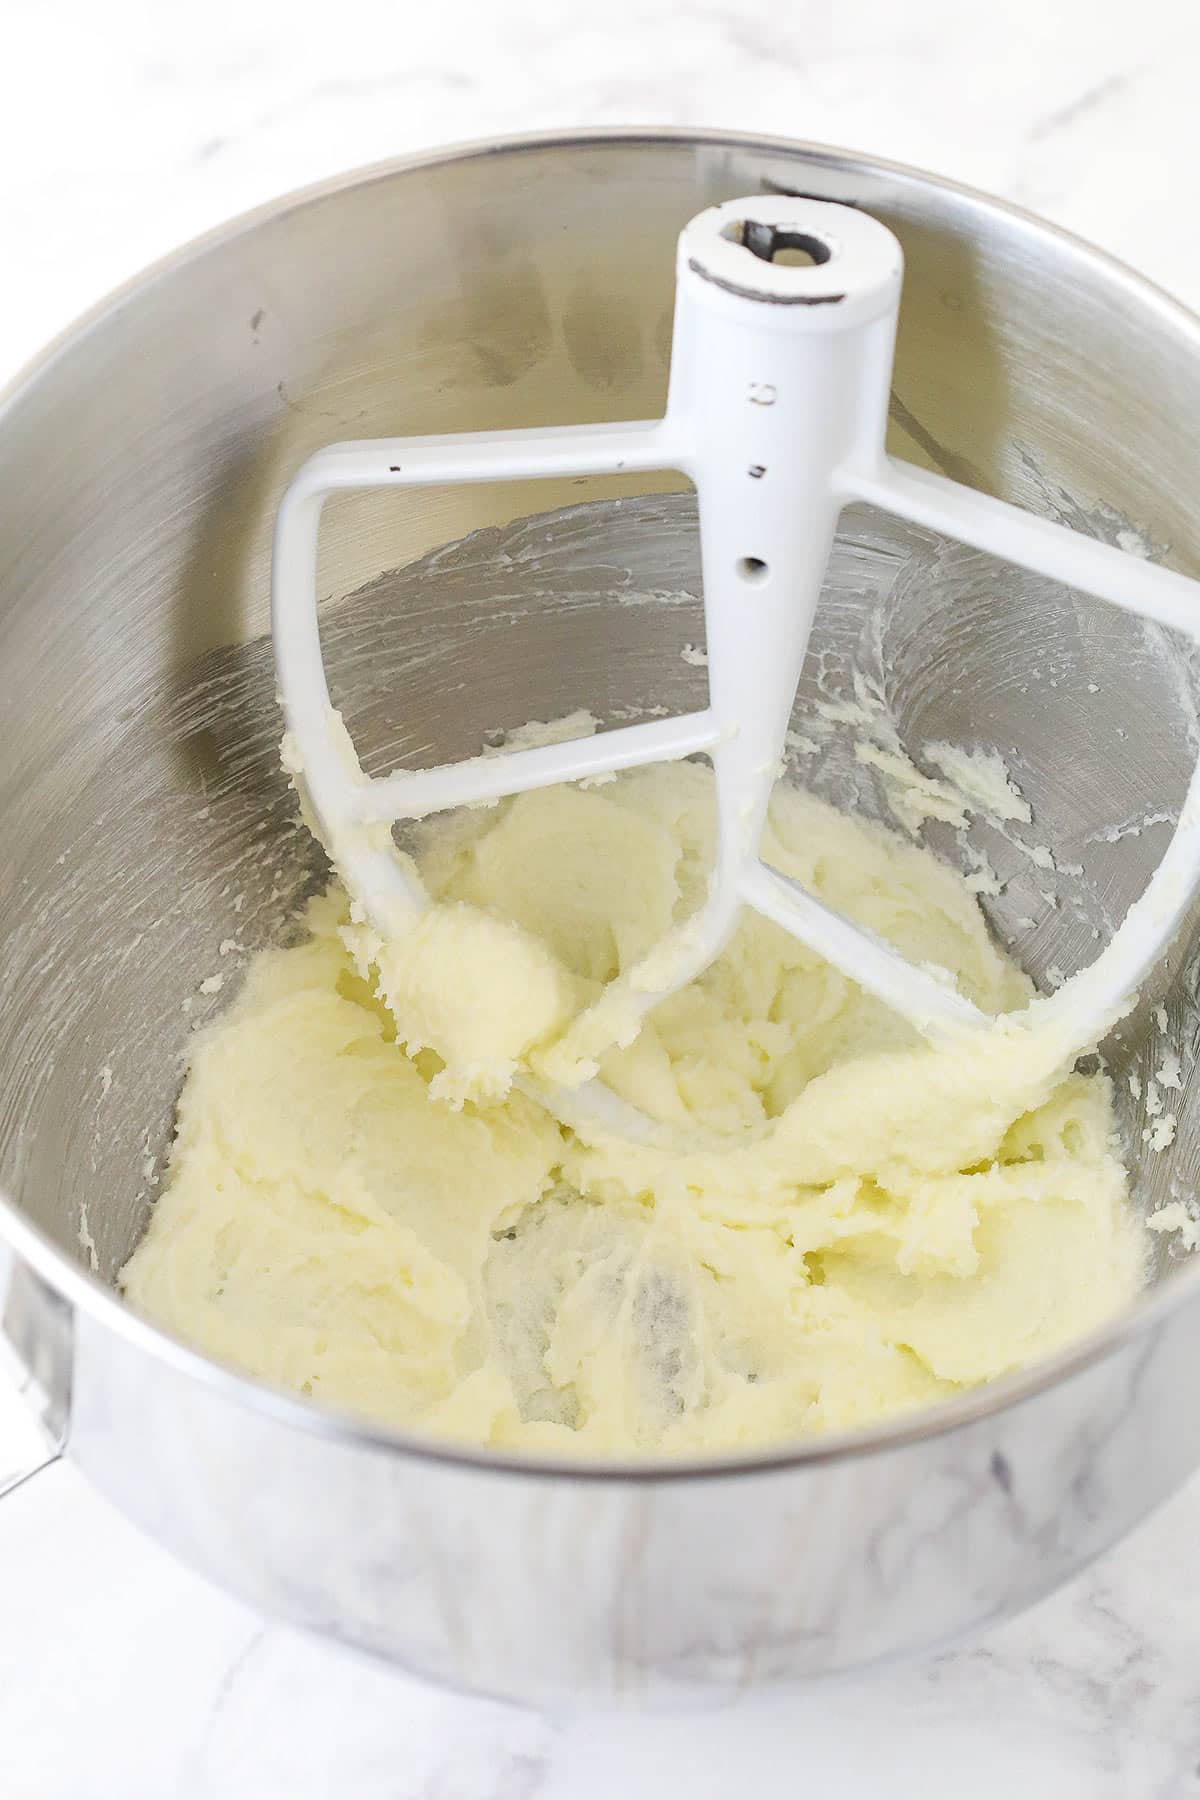 Creaming butter and sugar in a metal mixing bowl.